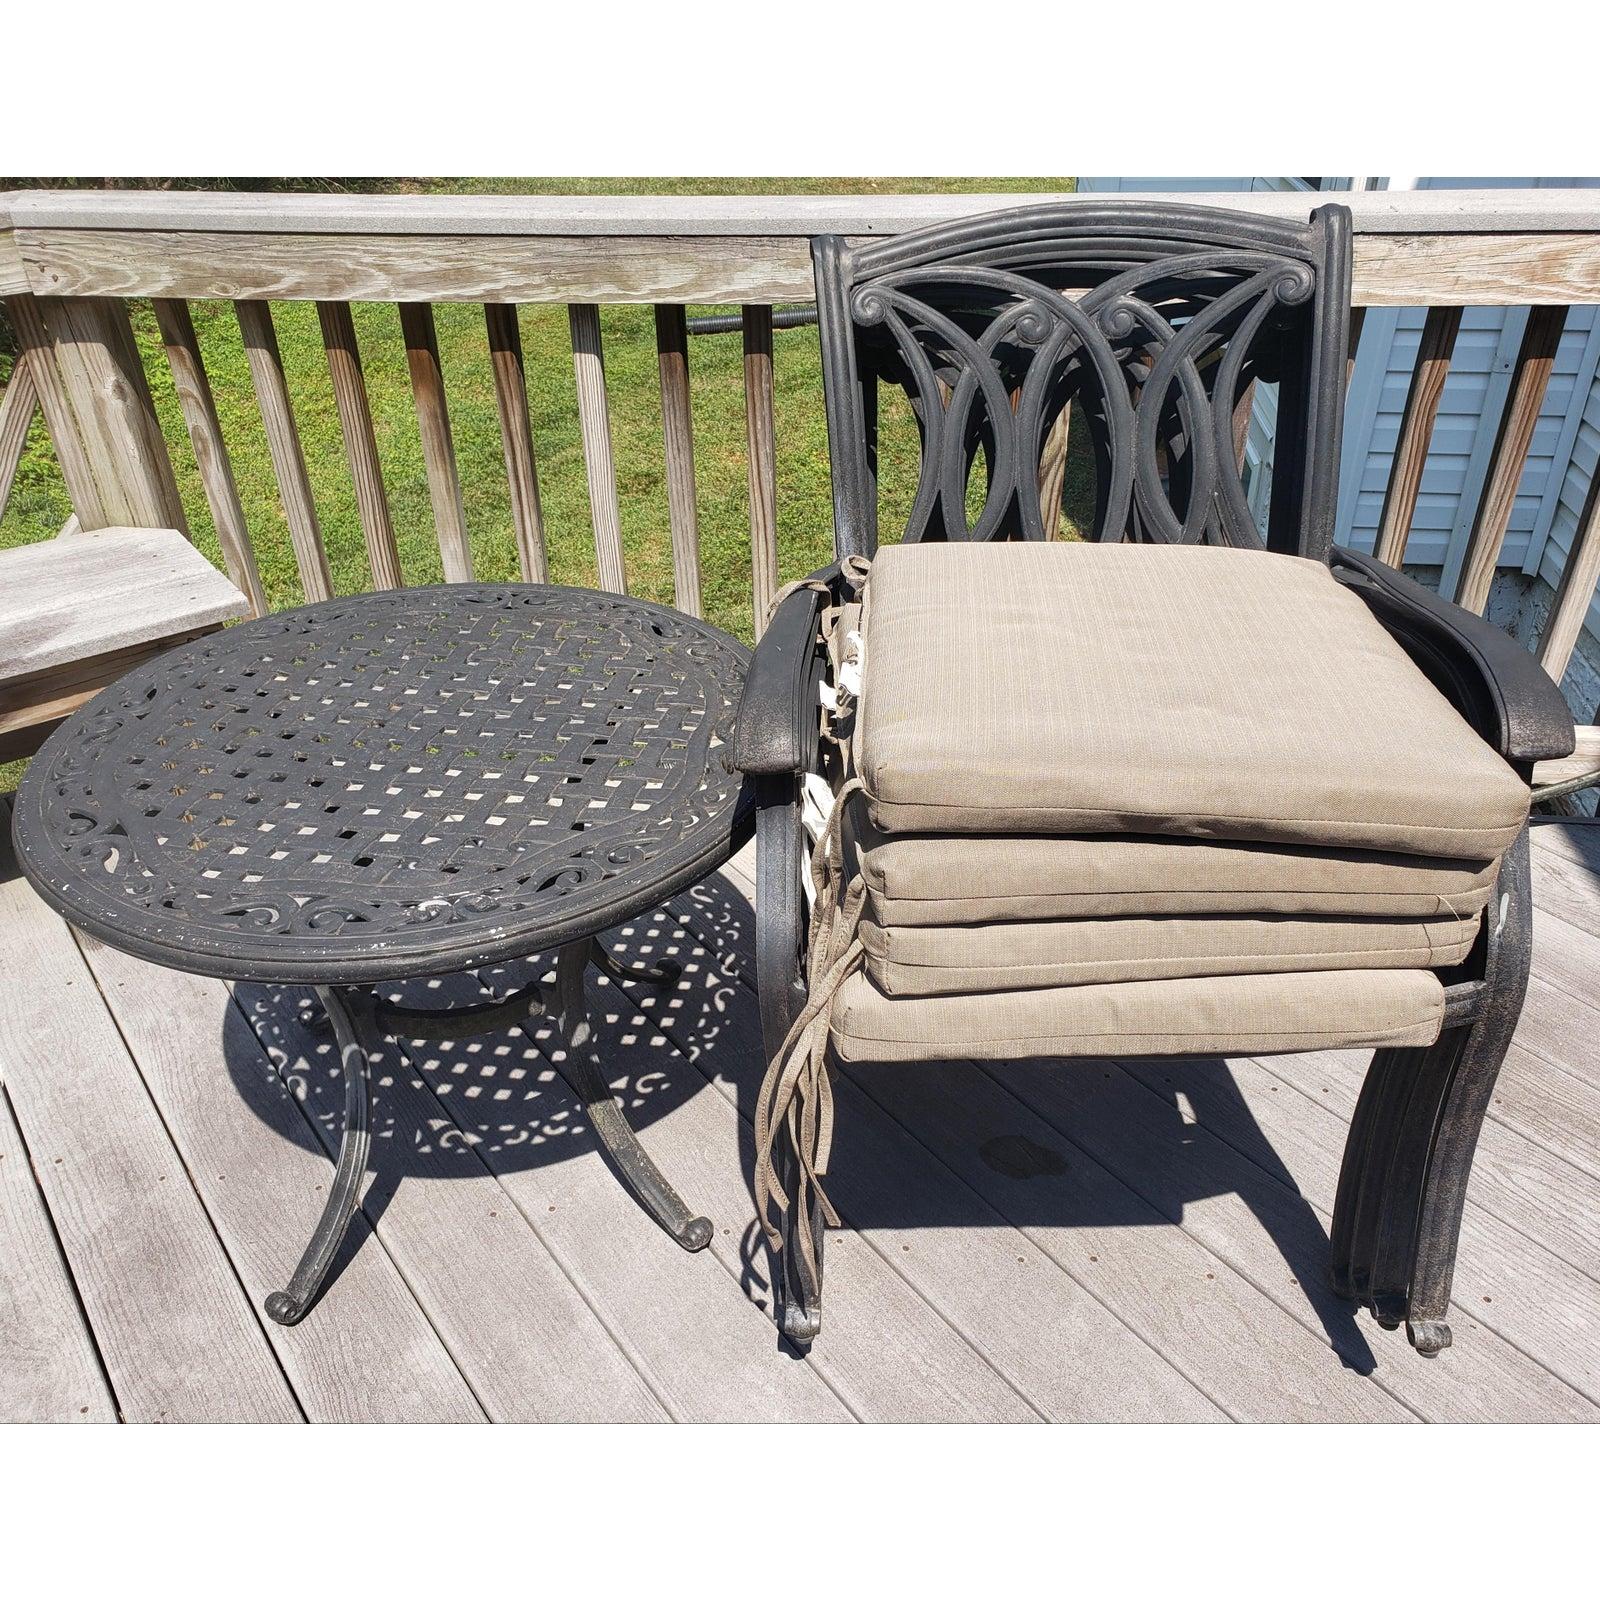 Metalwork Vintage Cast Aluminum Patio Table & 4 Armchairs with Cushions For Sale